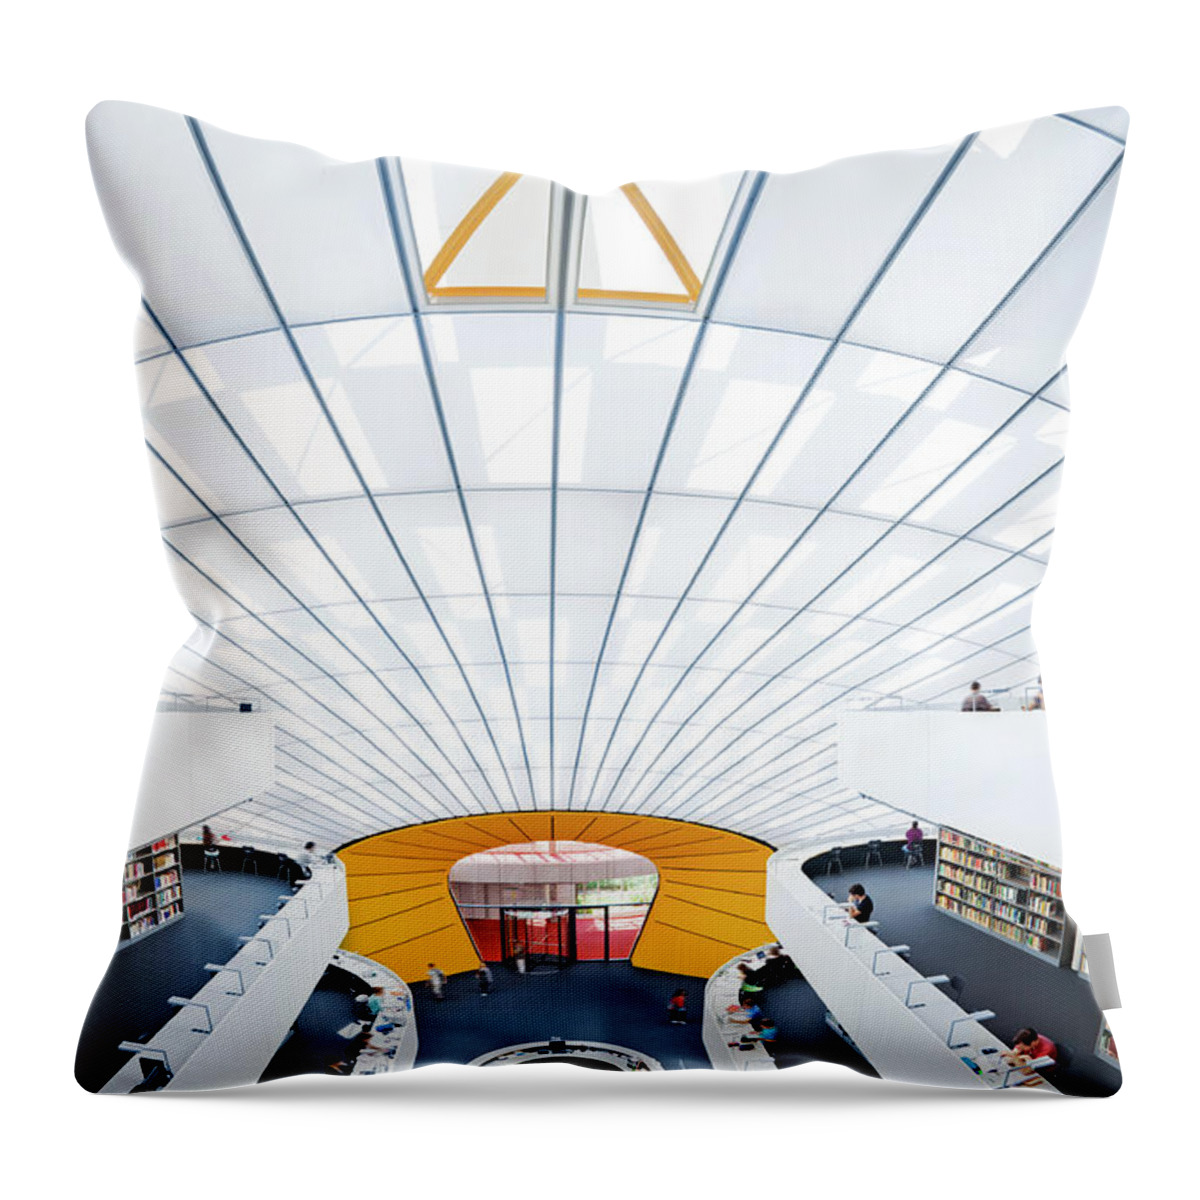 Home Decor Throw Pillow featuring the photograph Modern Library by Nikada